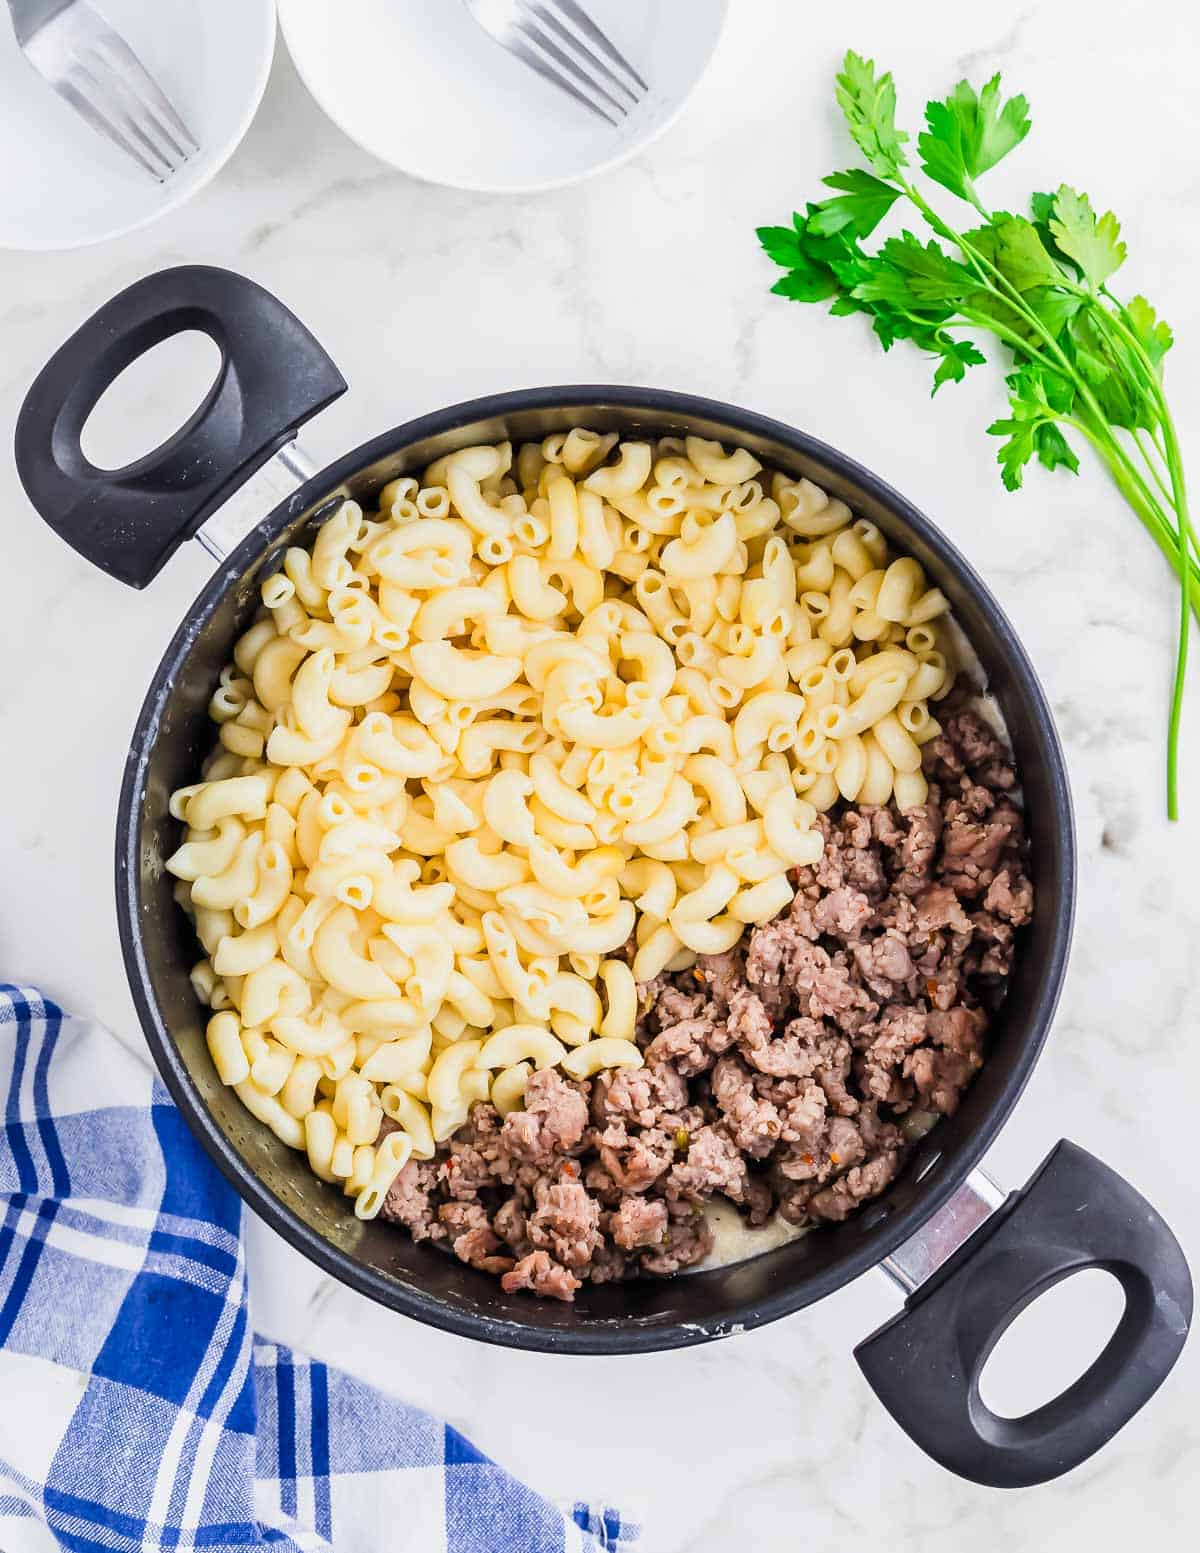 Macaroni and cheese in a skillet with sausage and parsley.